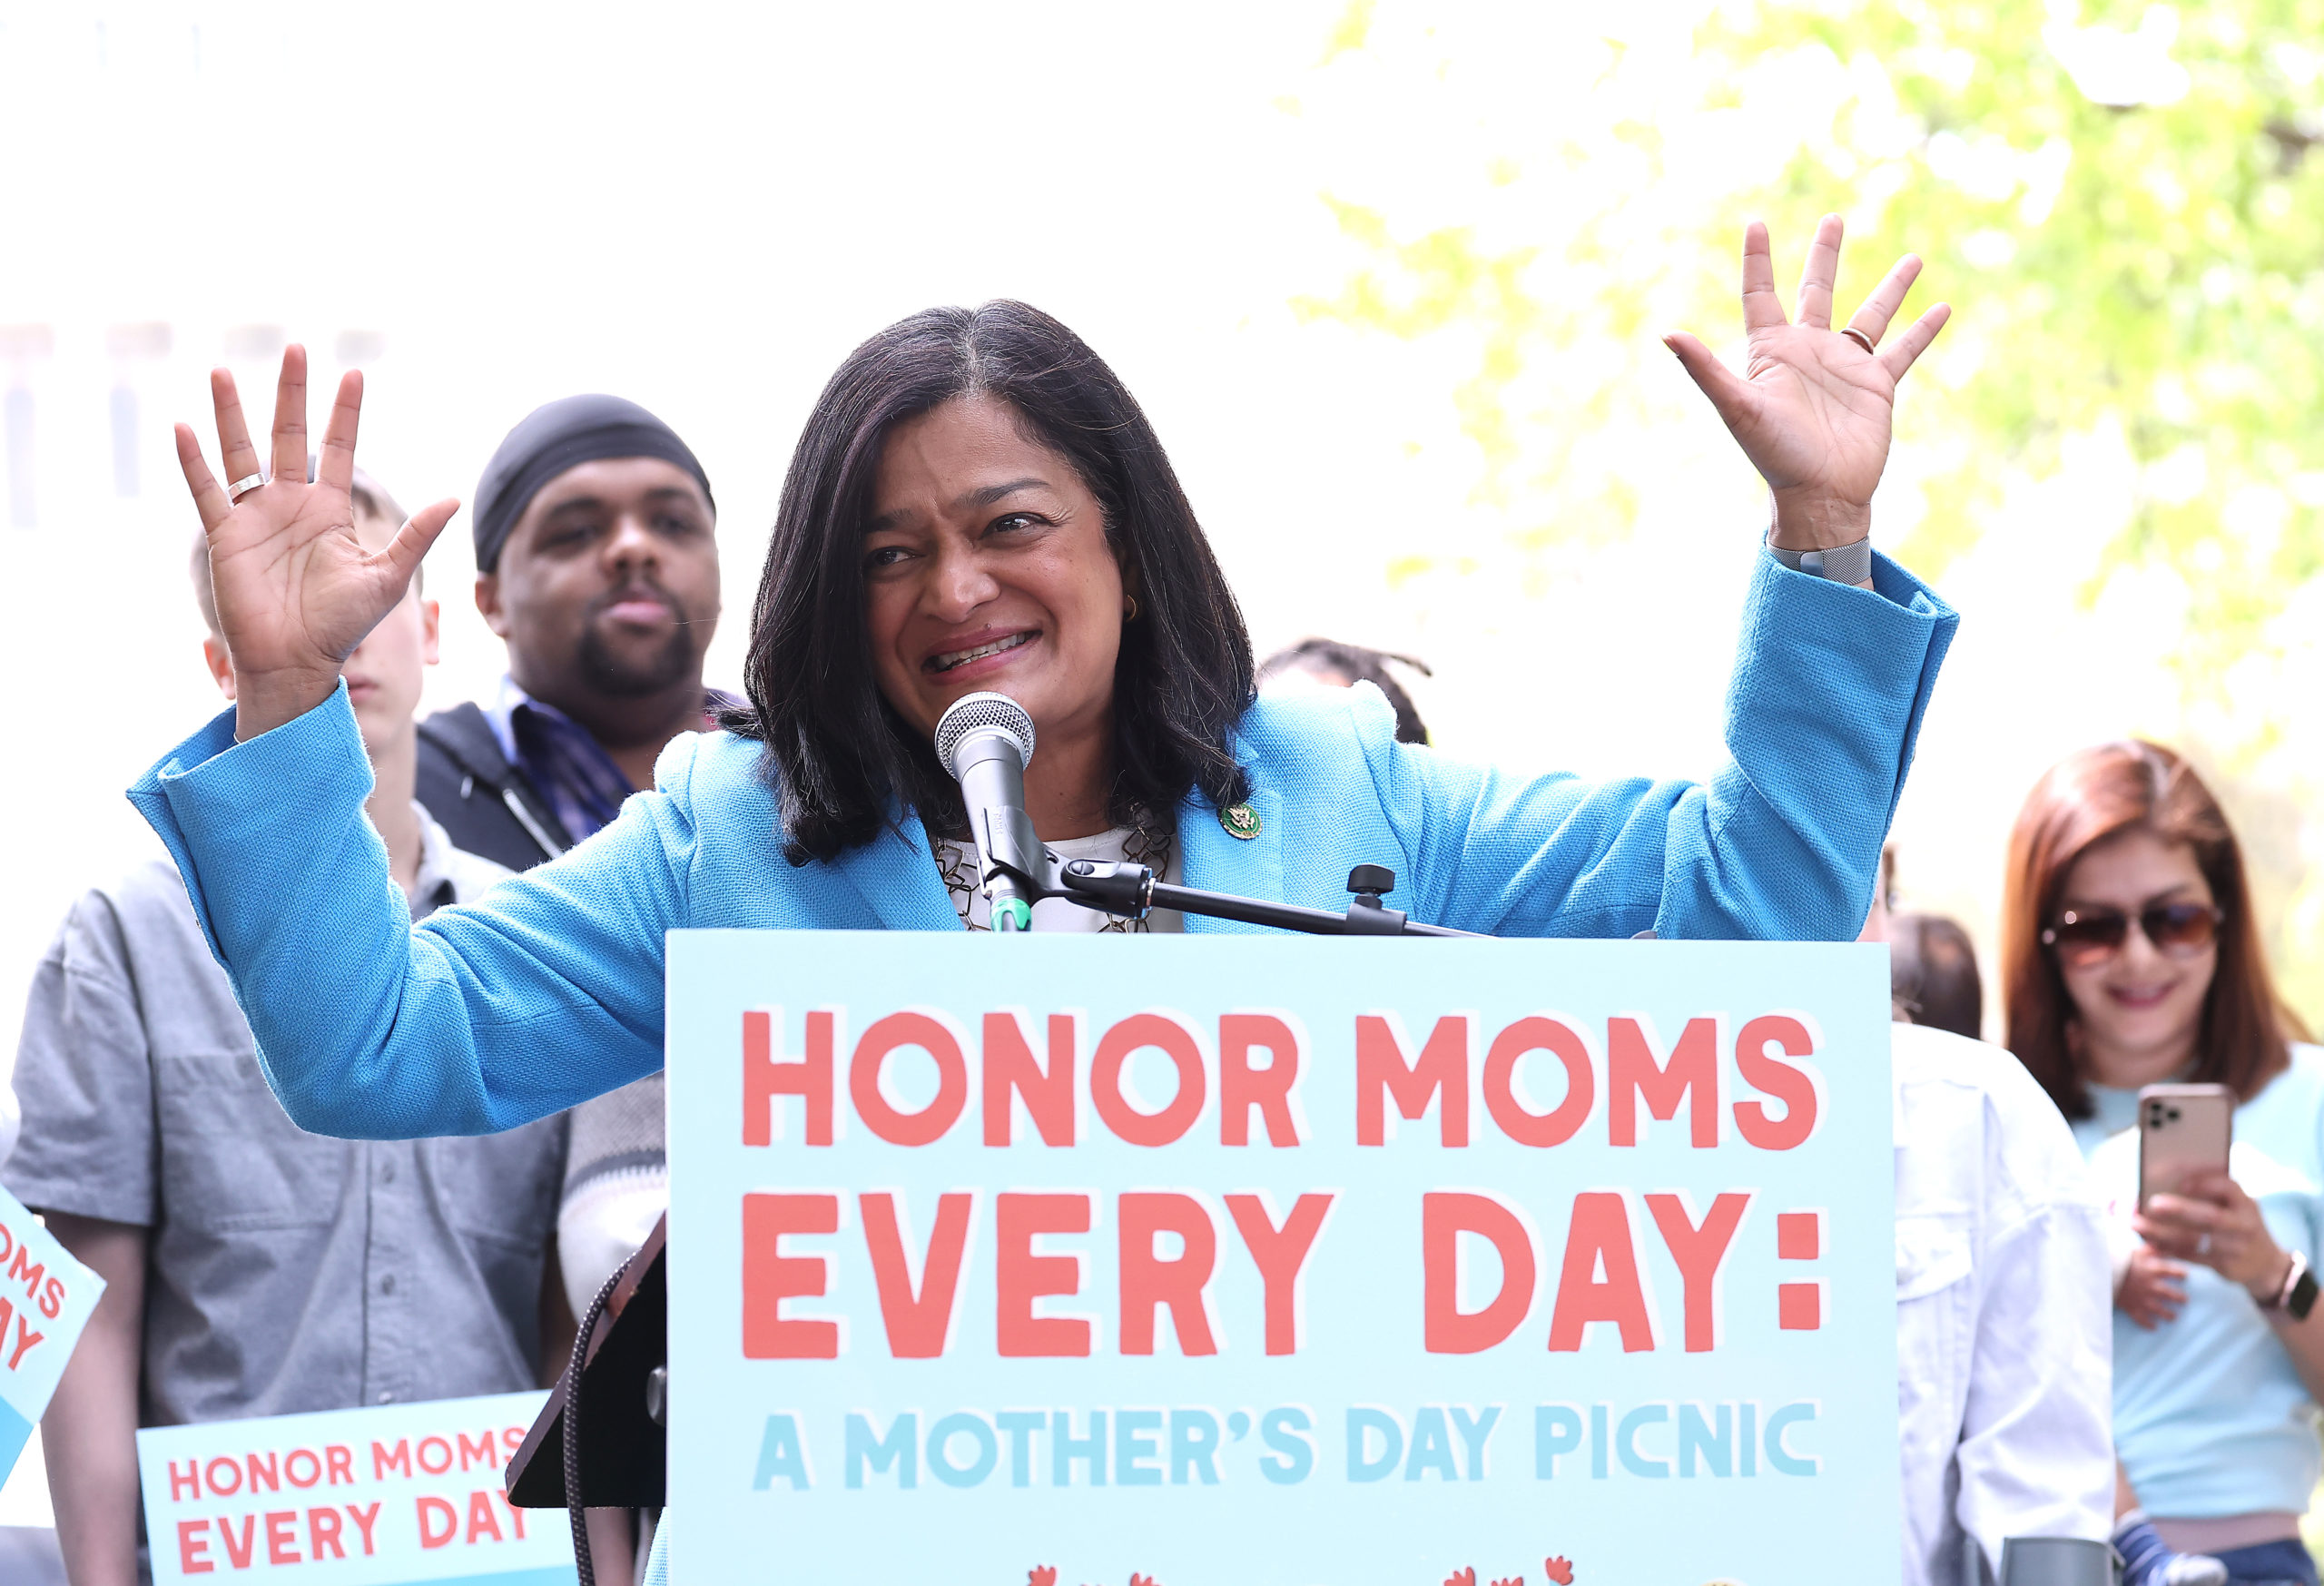 WASHINGTON, DC - MAY 17: Rep. Pramila Jayapal (D-WA) joins MomsRising members and their kids at a picnic on Capitol Hill to urge Congress to make child care affordable, pass paid leave, support care infrastructure, and raise the debt ceiling on May 17, 2023 in Washington, DC. (Photo by Paul Morigi/Getty Images for MomsRising)